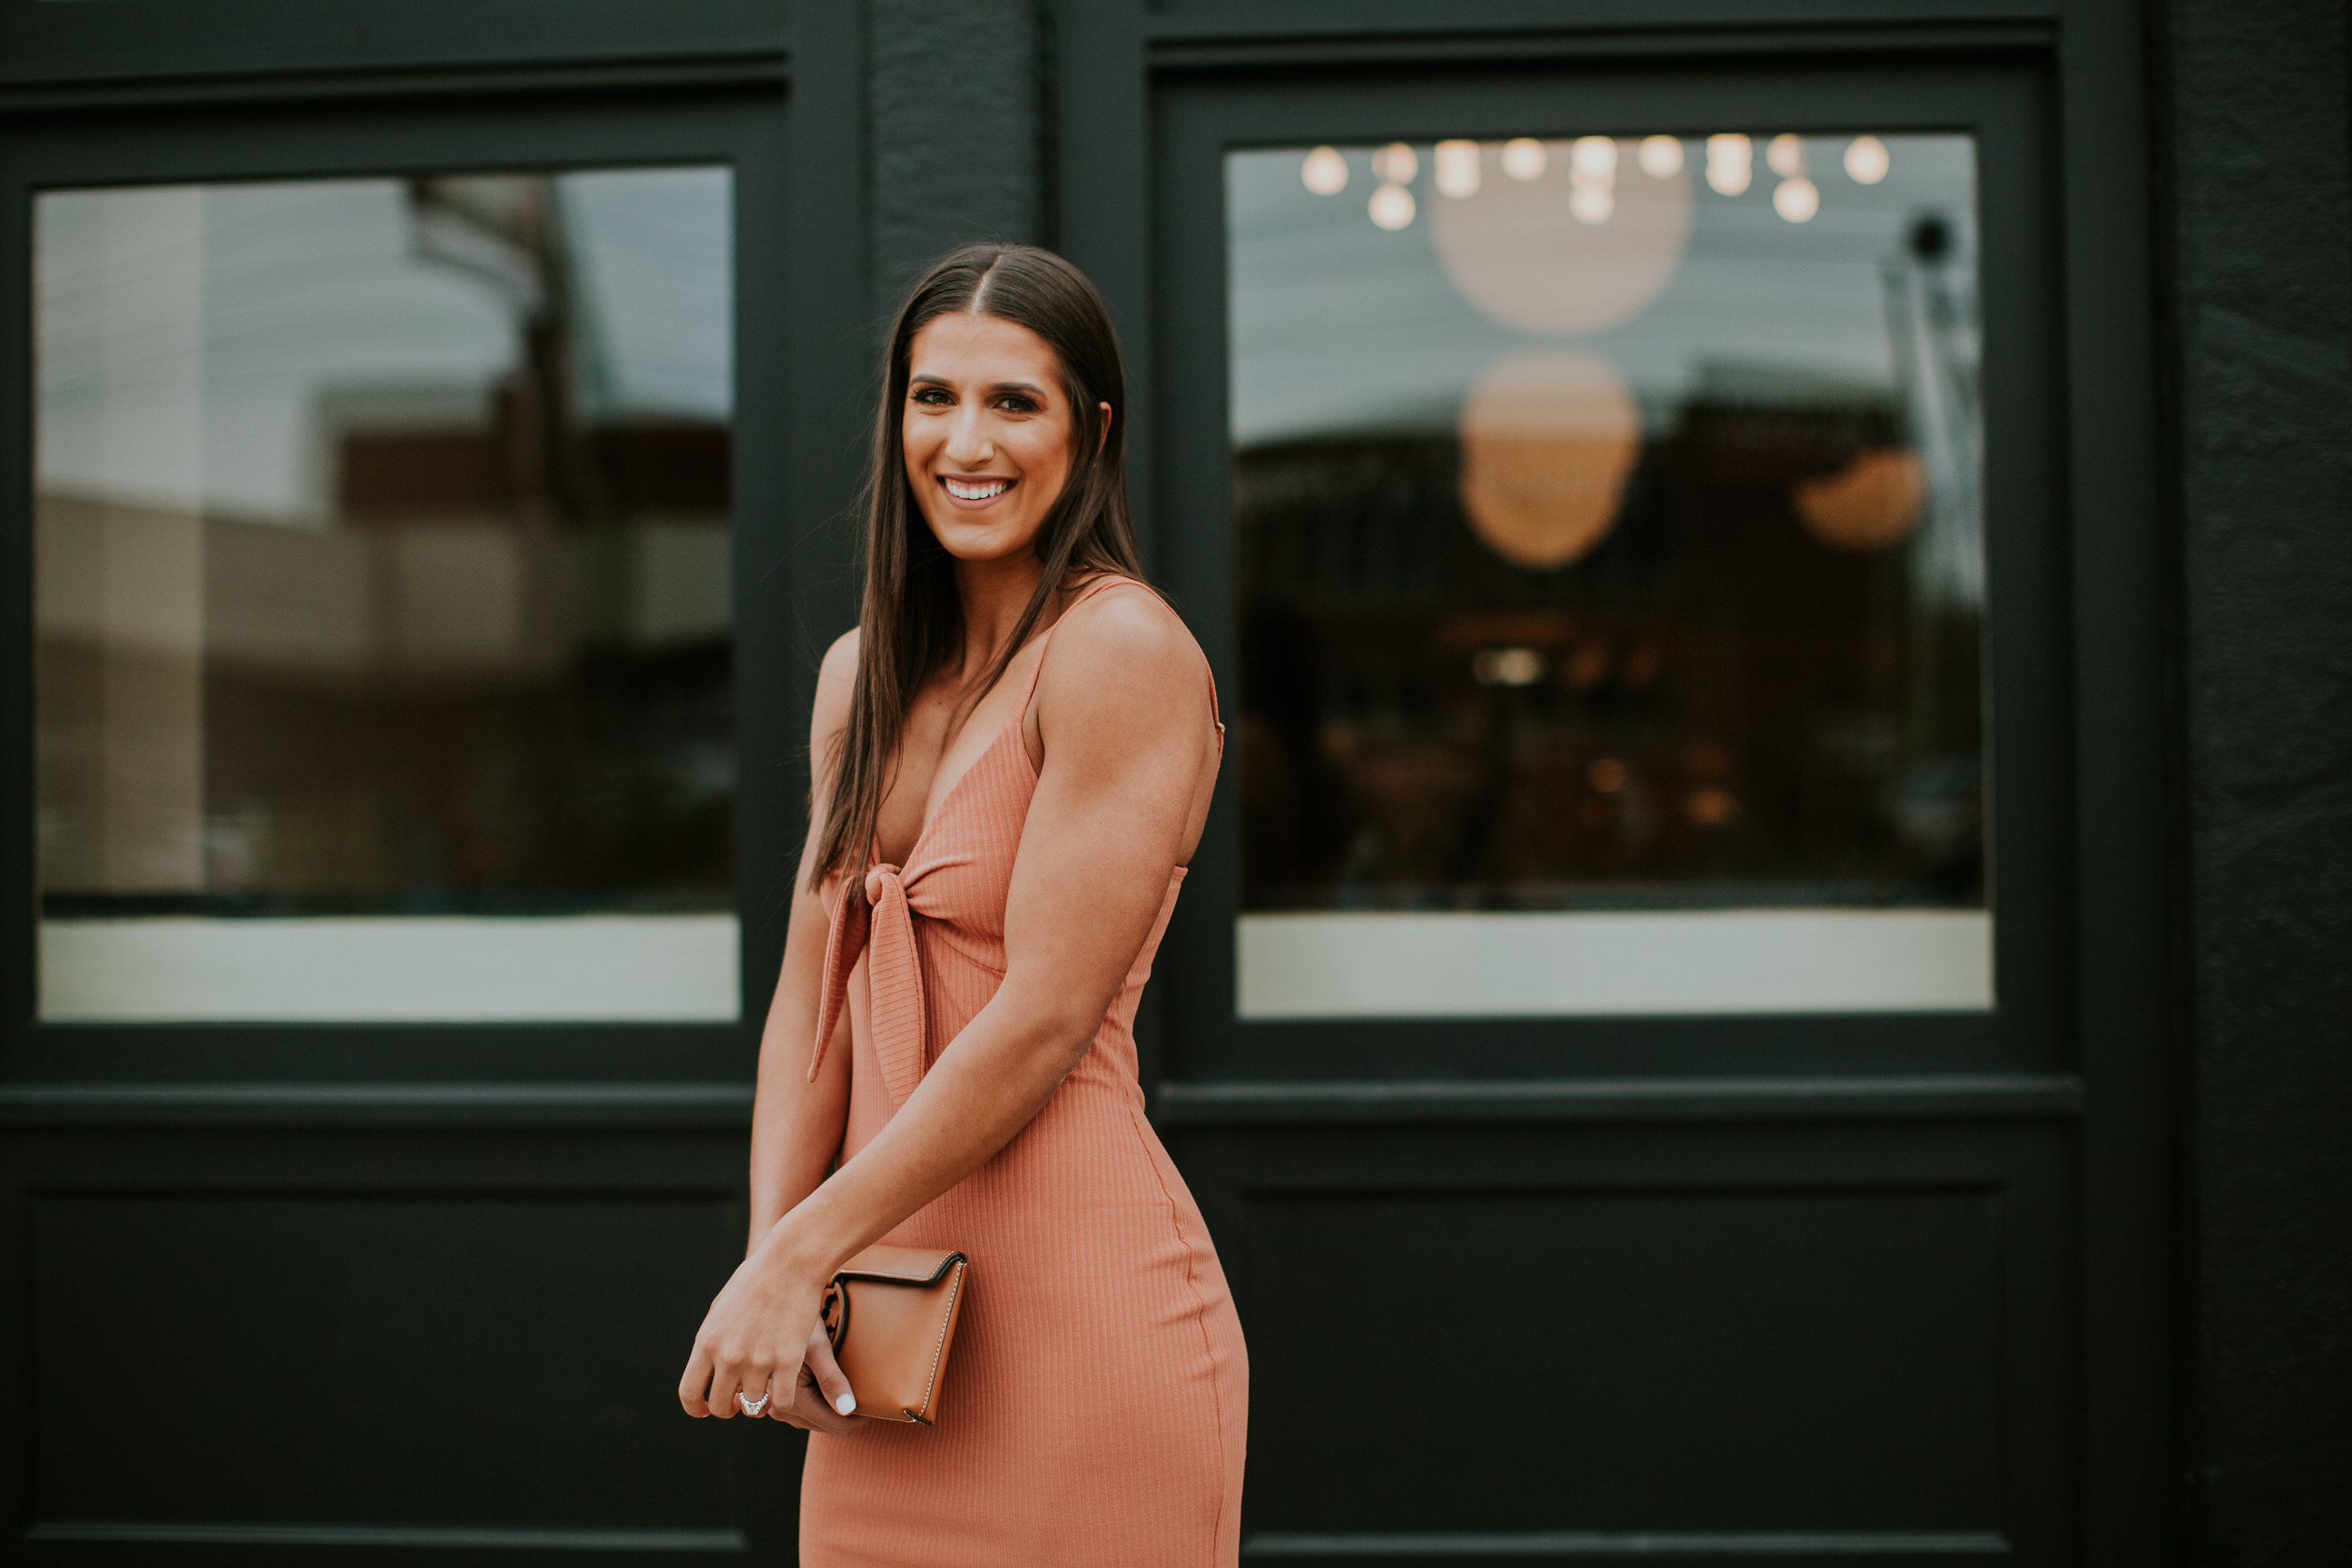 affordable cocktail dress, affordable dresses, affordable midi dress, affordable summer dress, wedding guest dresses, minnkpink dresses, minkpink dress // grace wainwright a southern drawl